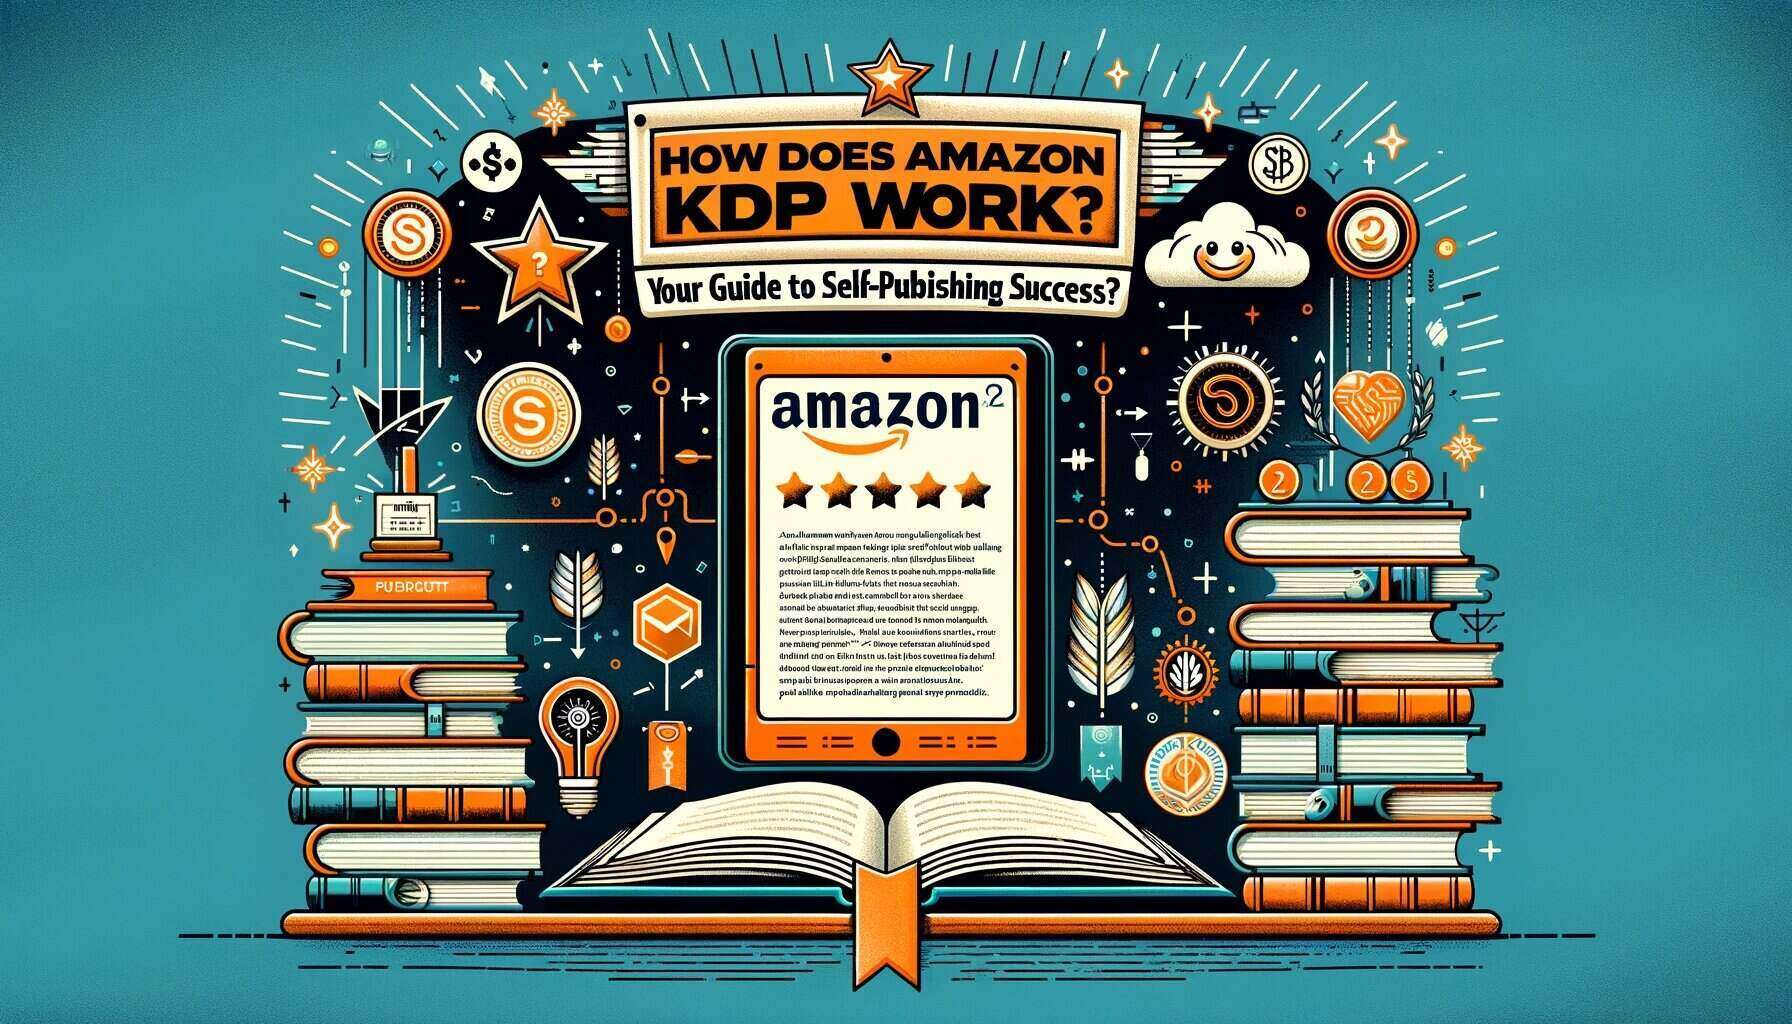 How Does Amazon KDP Work? Complete Guide to Self-Publish